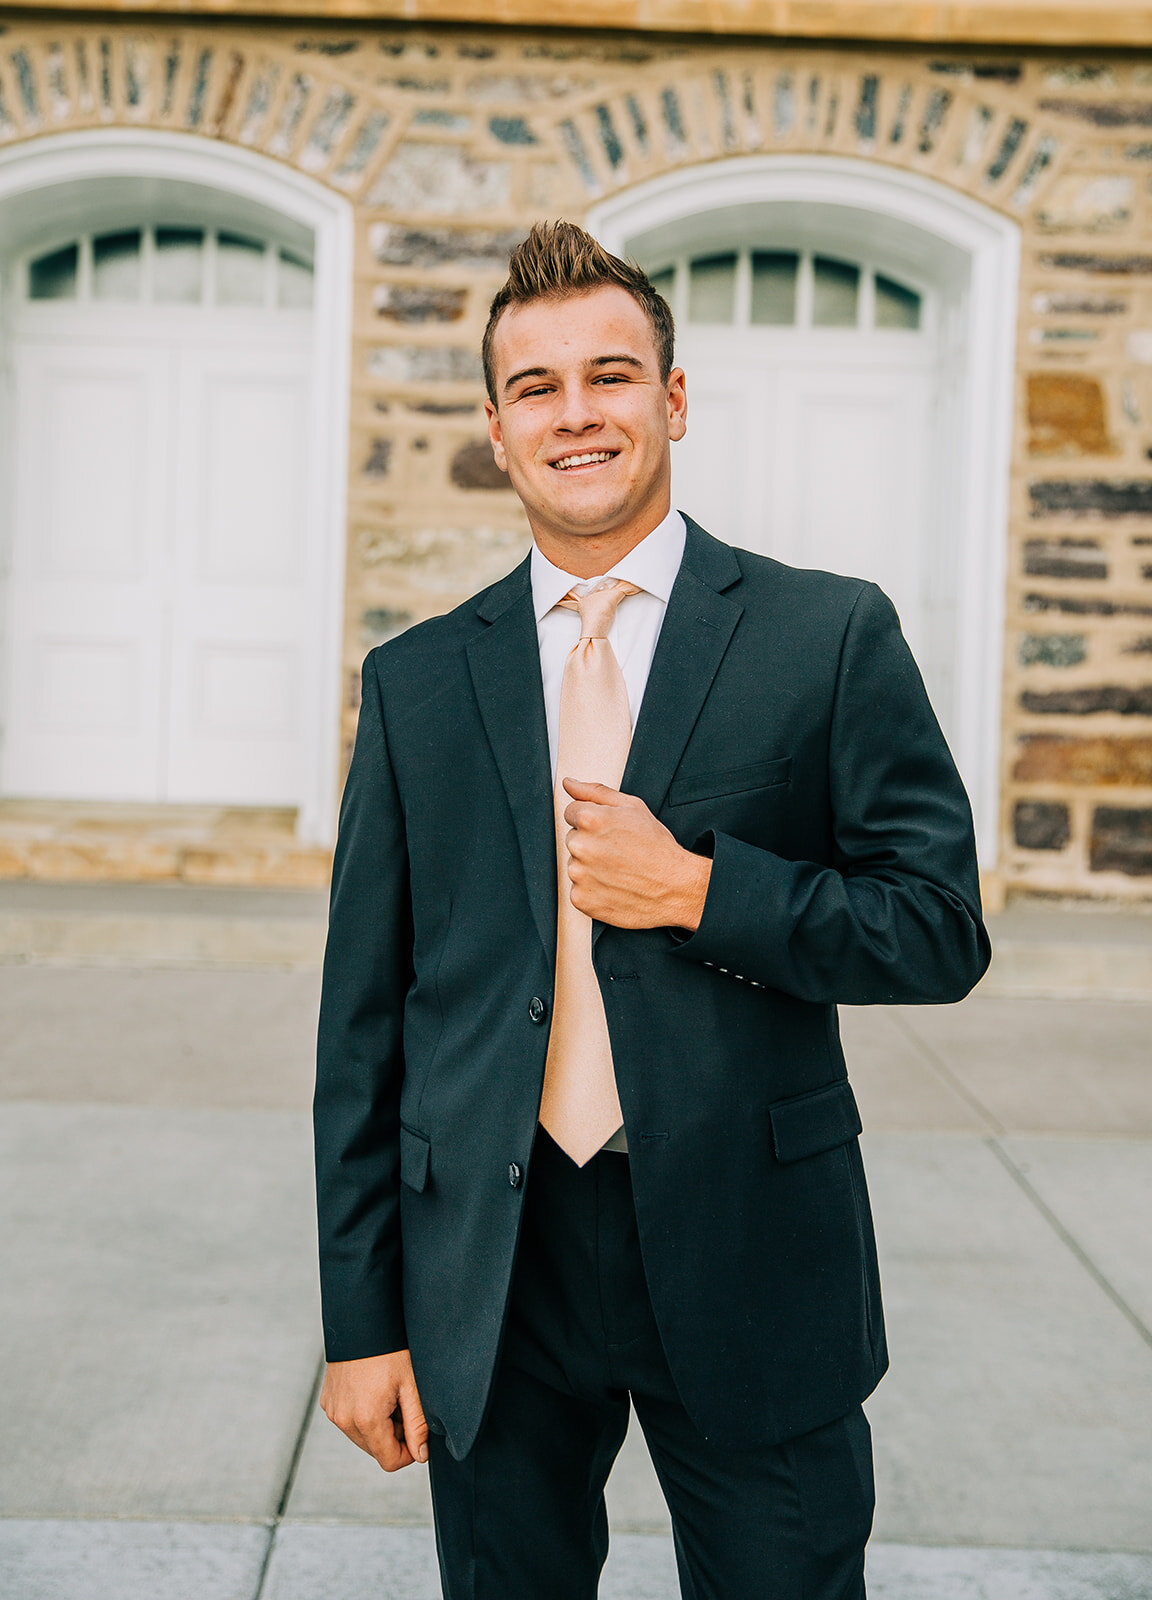  mission pictures logan utah temple lds mission missionary photo shoot professional portraits photographer cache valley bella alder photography northern utah missionary photos blush tie black suit book of mormon I hope they call me on a mission elder